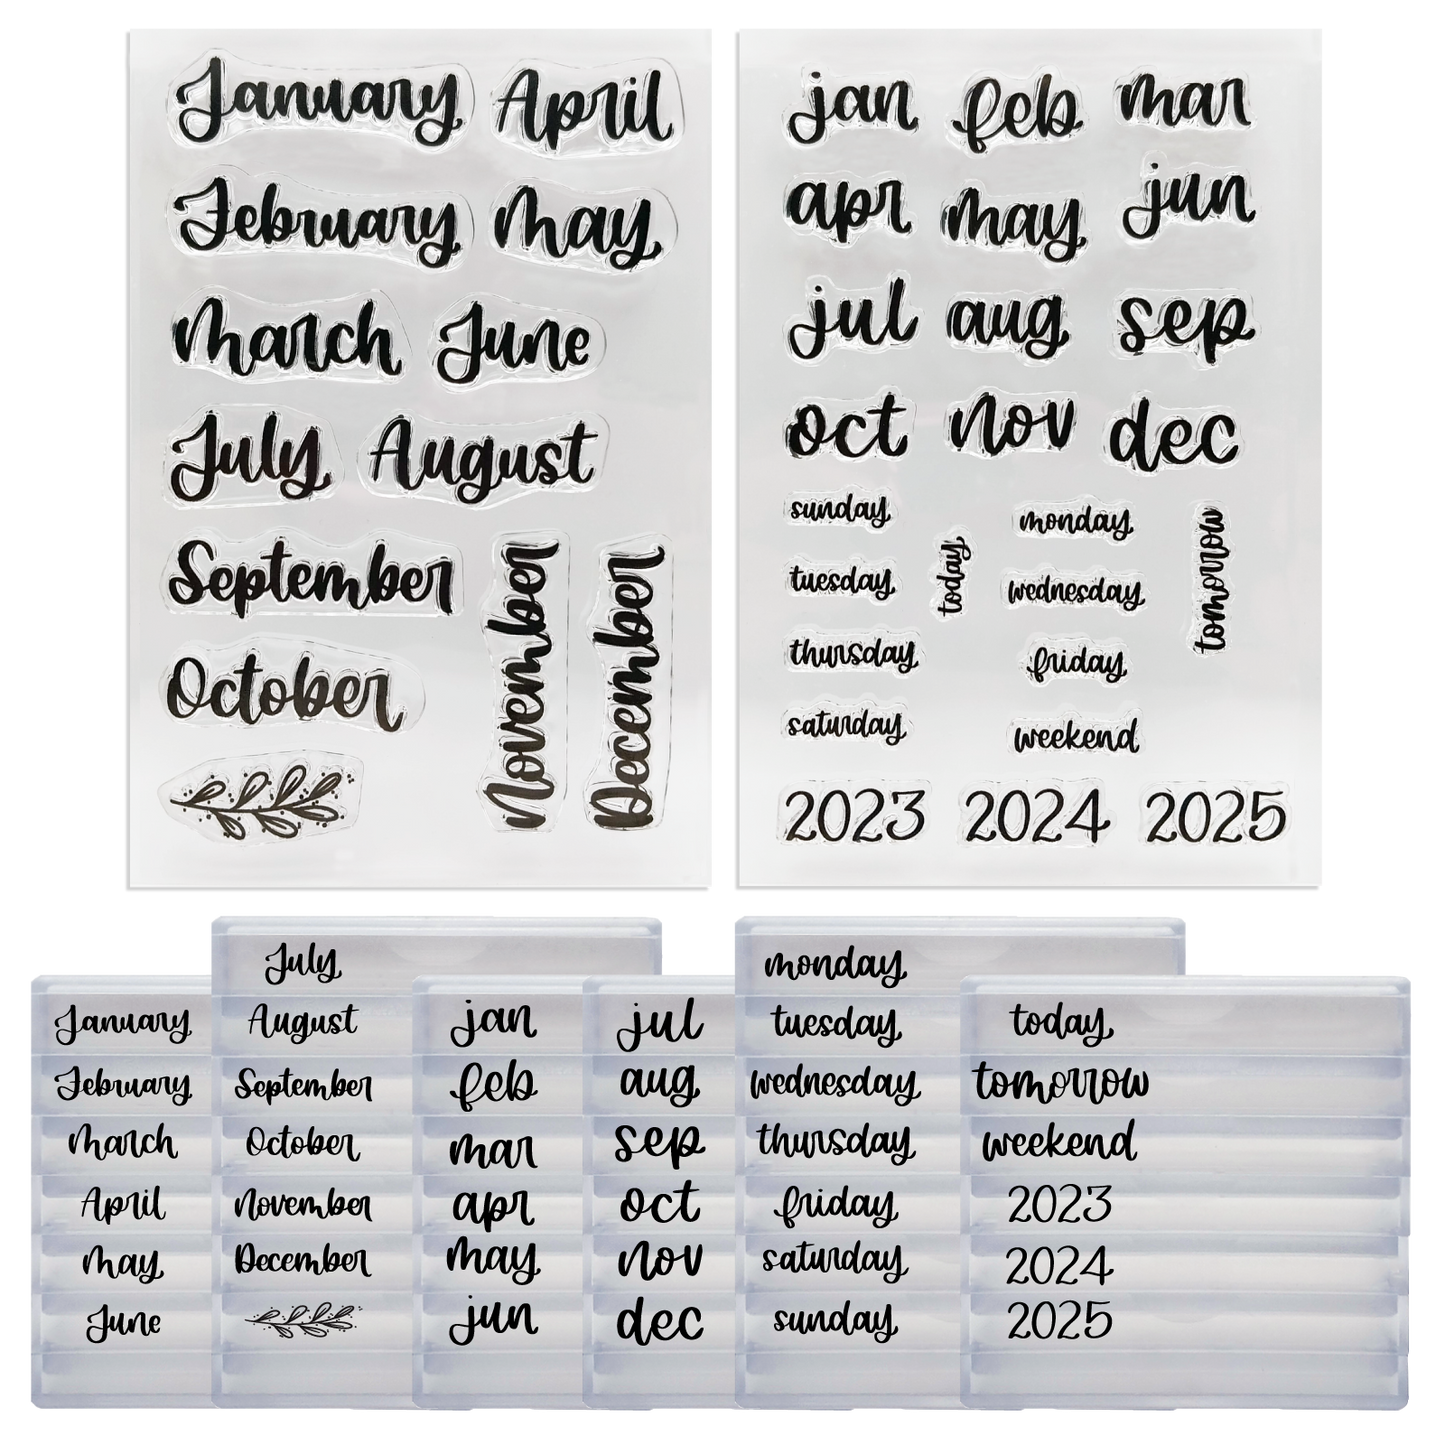 Months of the Year Stamp,bullet Journal Planner Stamp,transparent Stamp,  Journal Planner Stamp,numbers Clear Transparent Stamp,month Stamp 